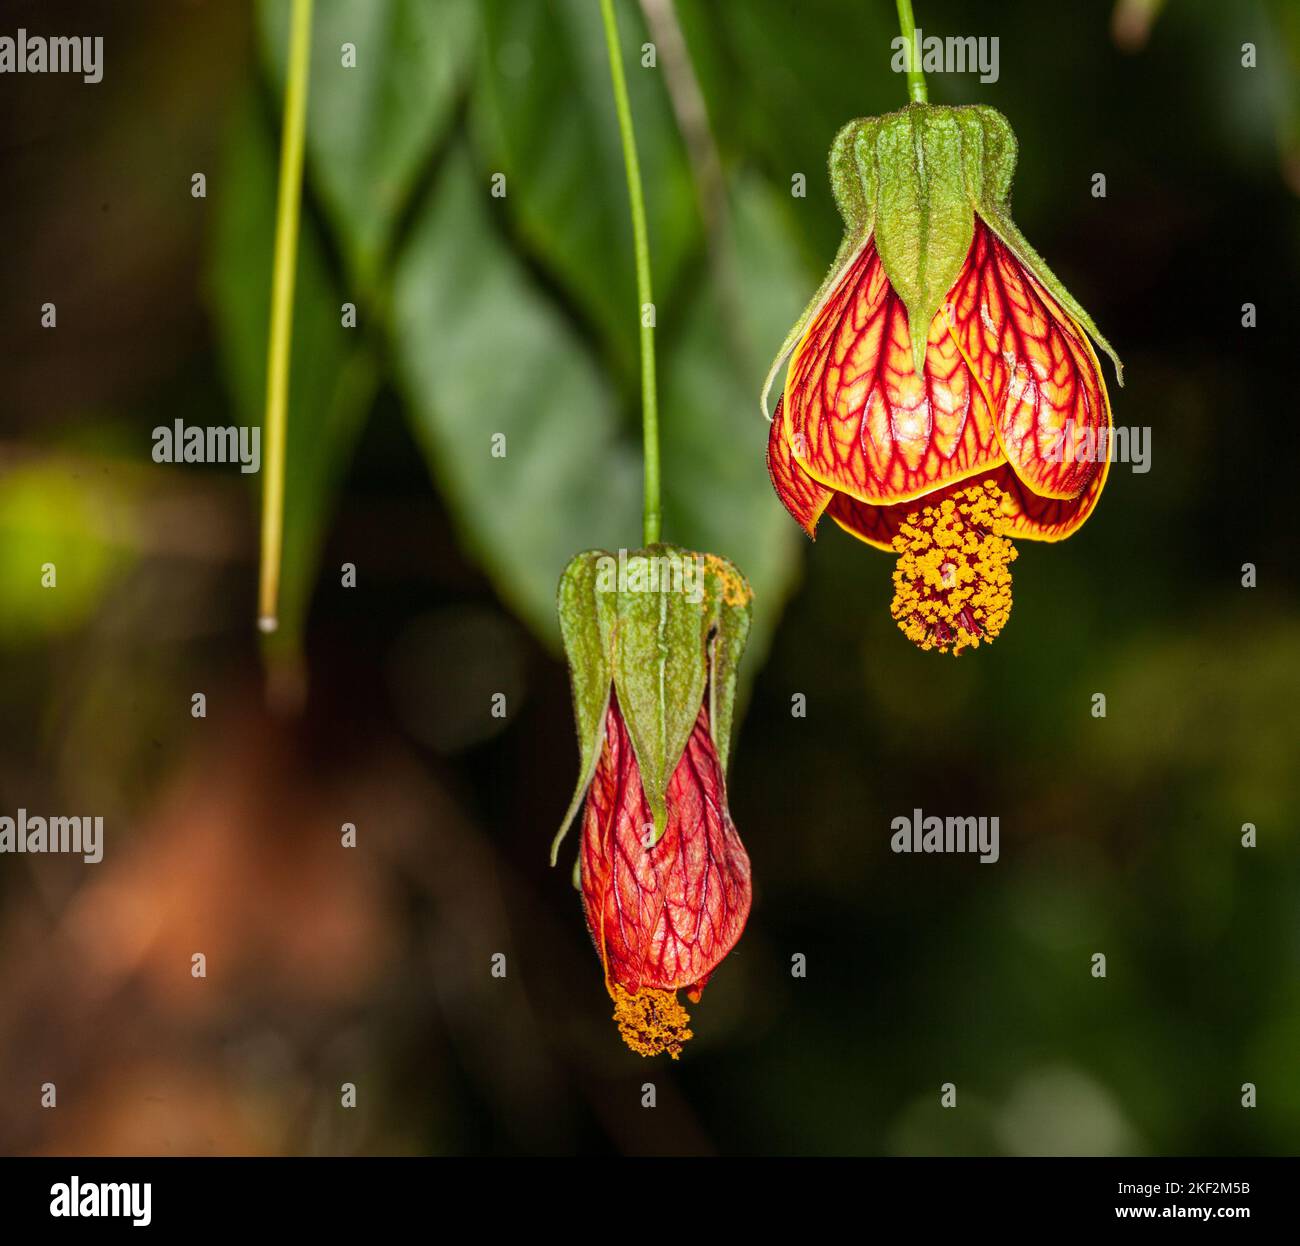 Abutilon pictum is a species of flowering plant in the family Malvaceae. It is native to southern Brazil, Argentina, Paraguay and Uruguay. It is edibl Stock Photo